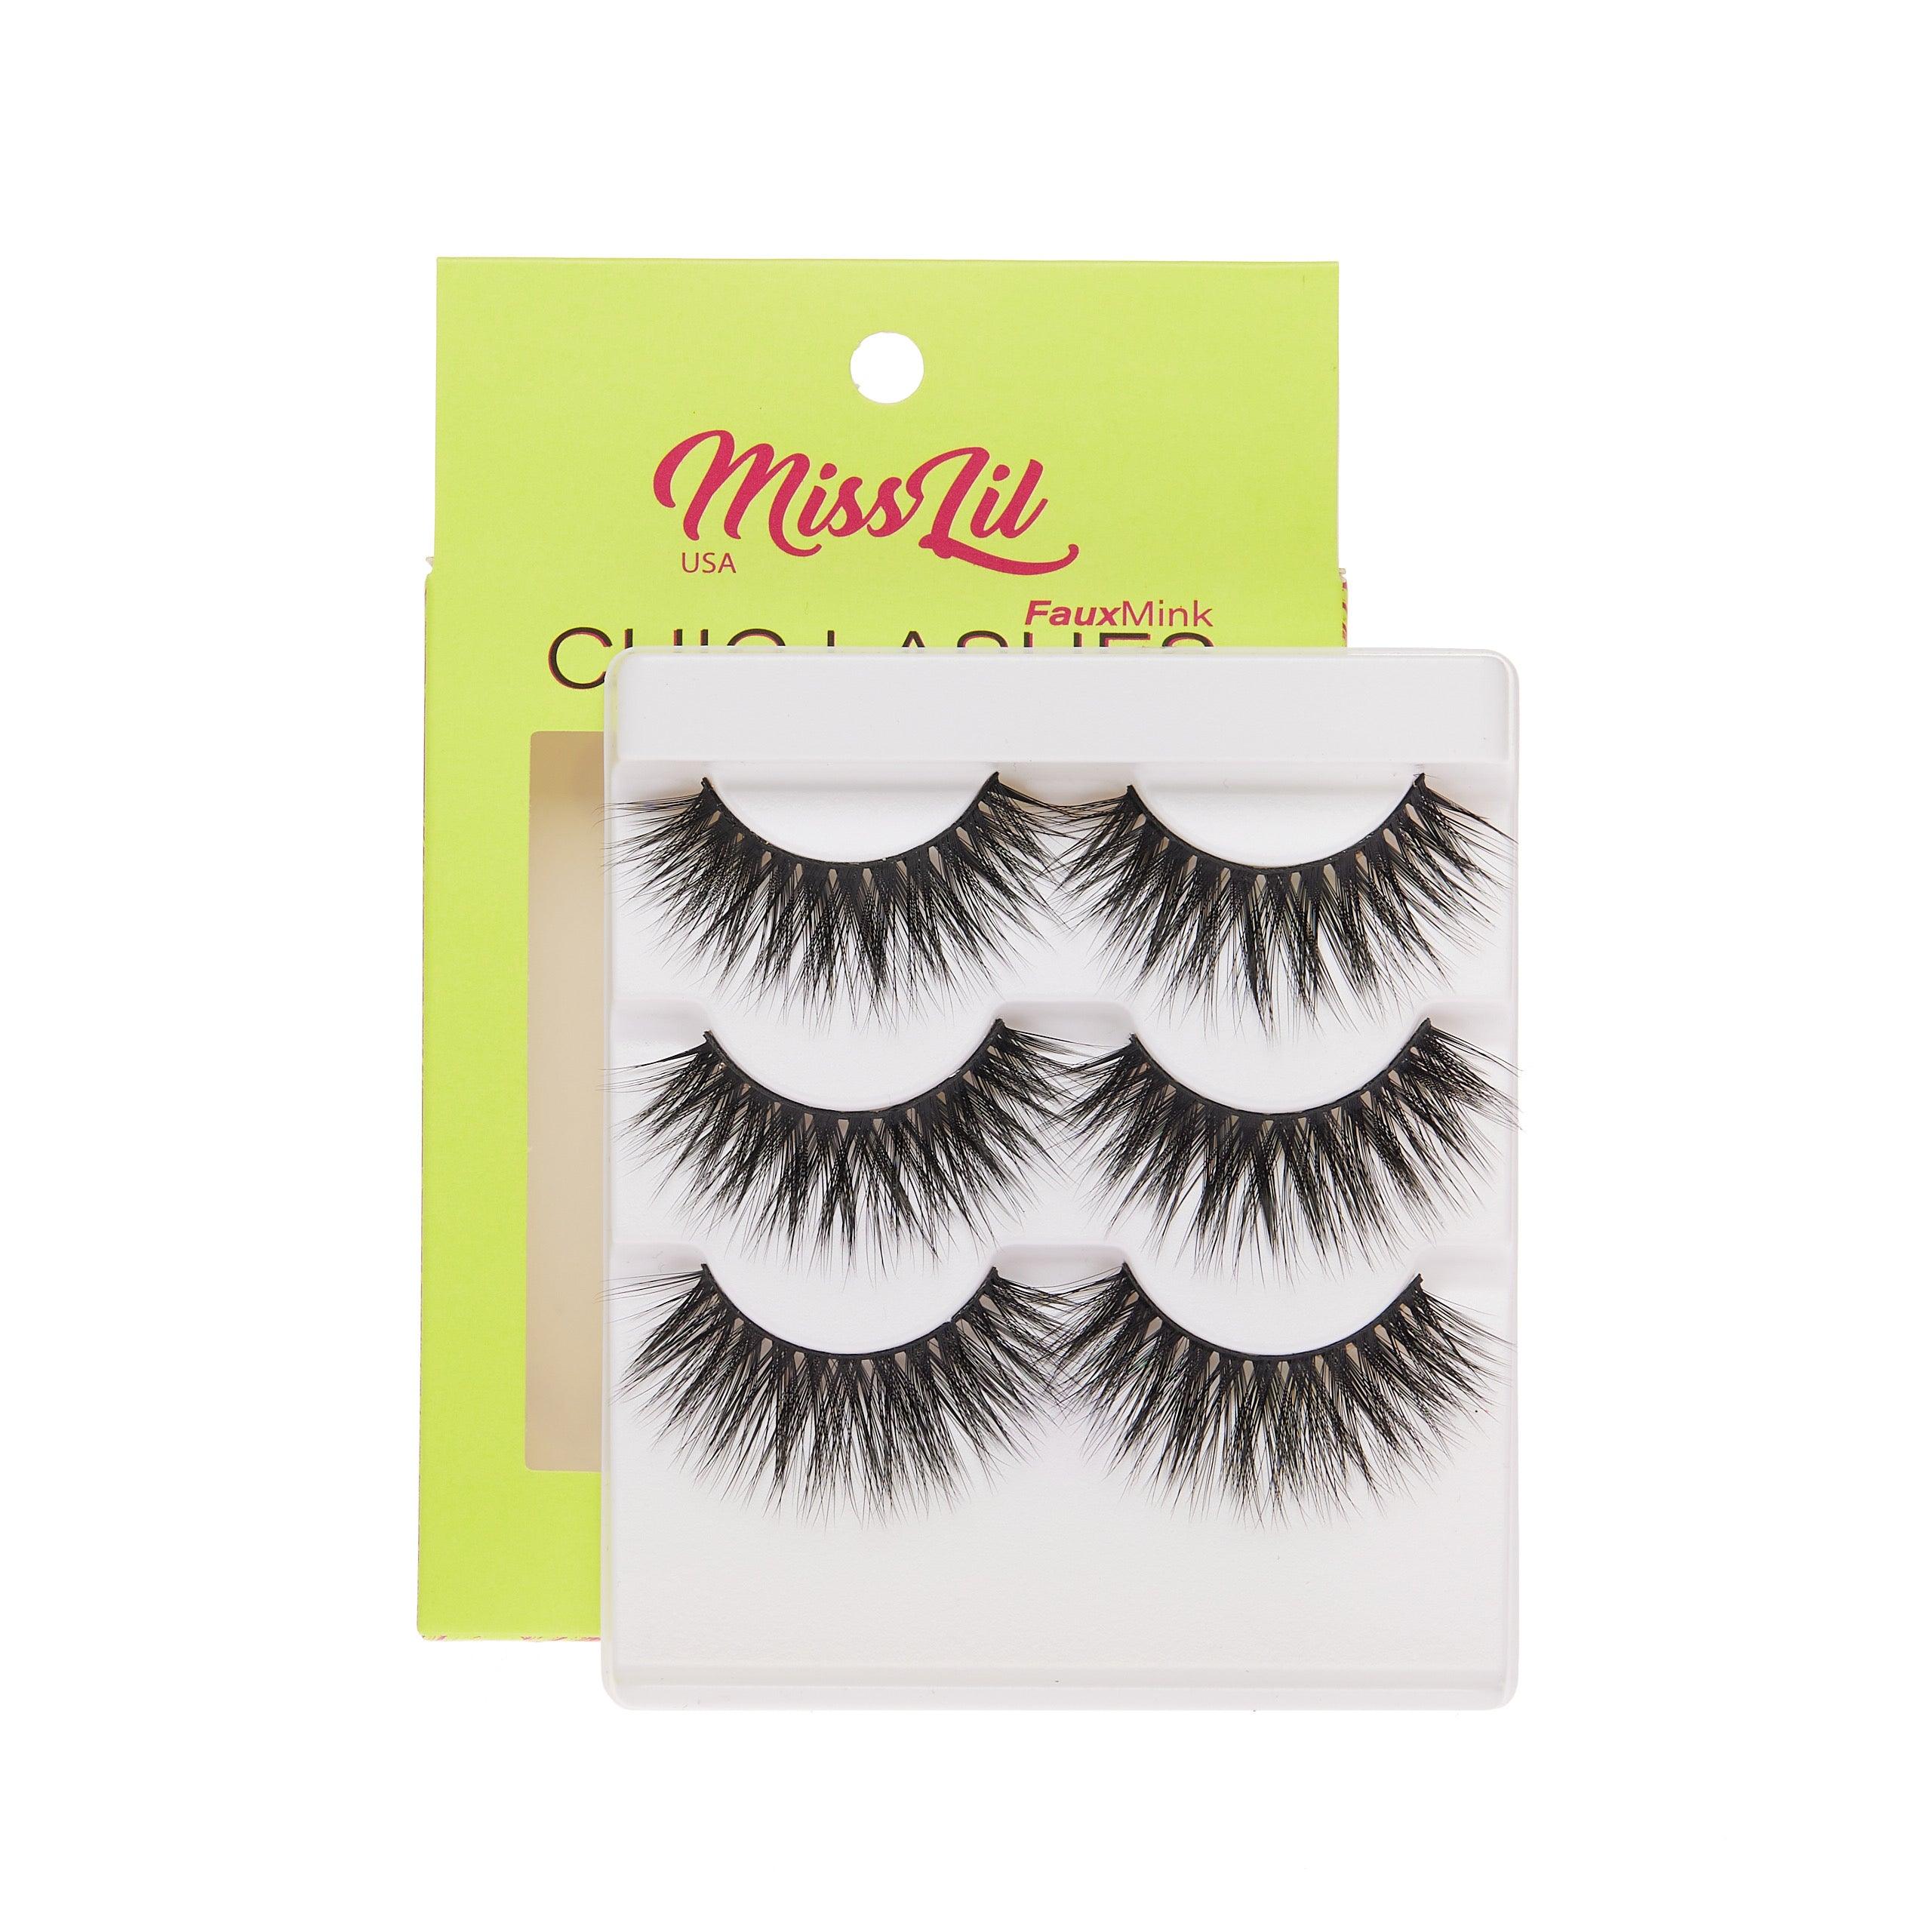 3-Pair Faux Mink Eyelashes - Chic Lashes Collection #8 - Pack of 3 - Miss Lil USA